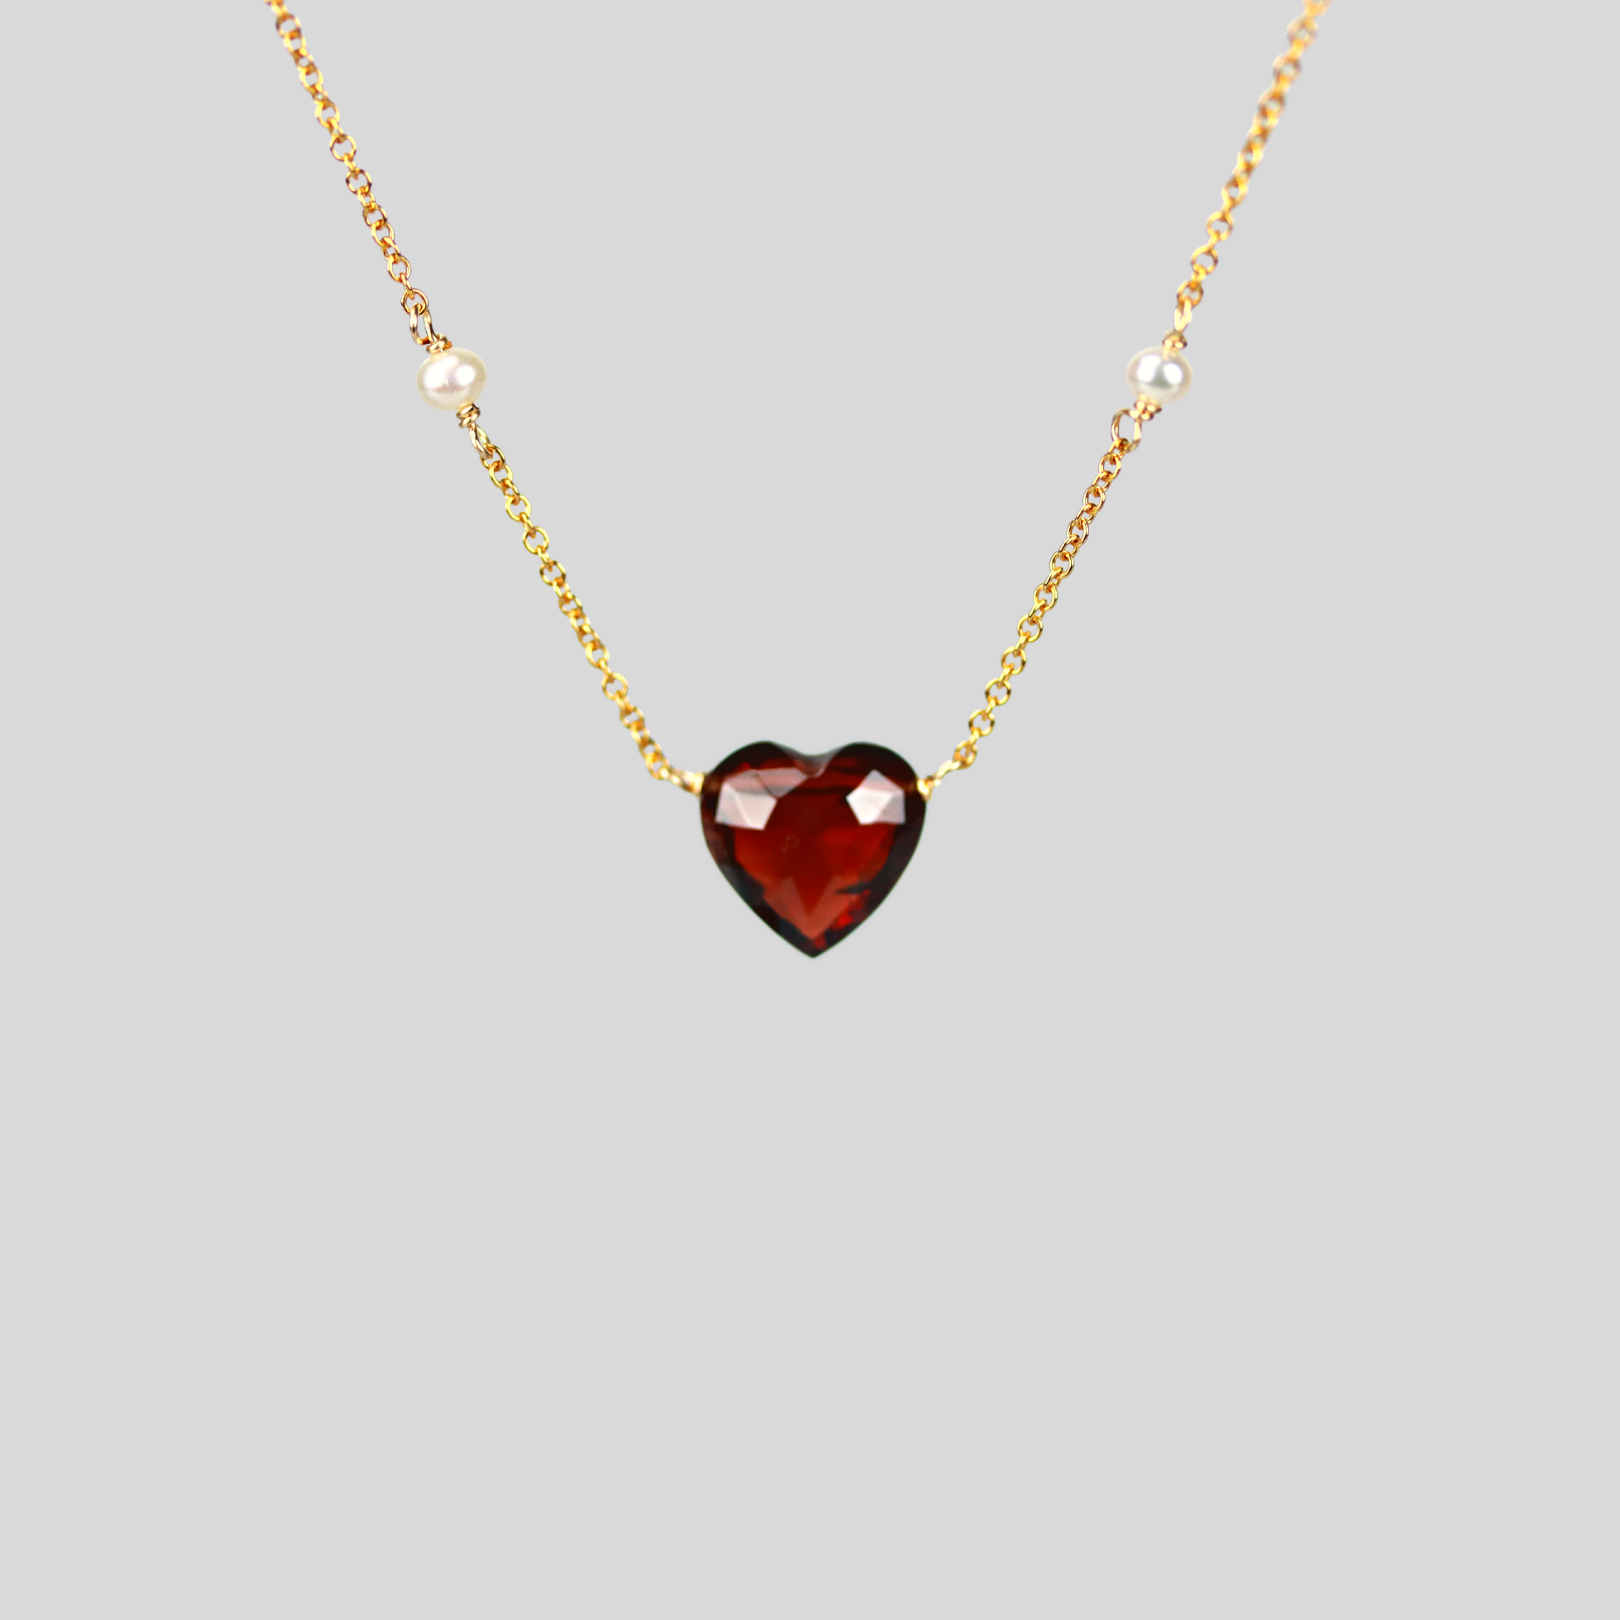 Garnet heart necklace with seed pearls